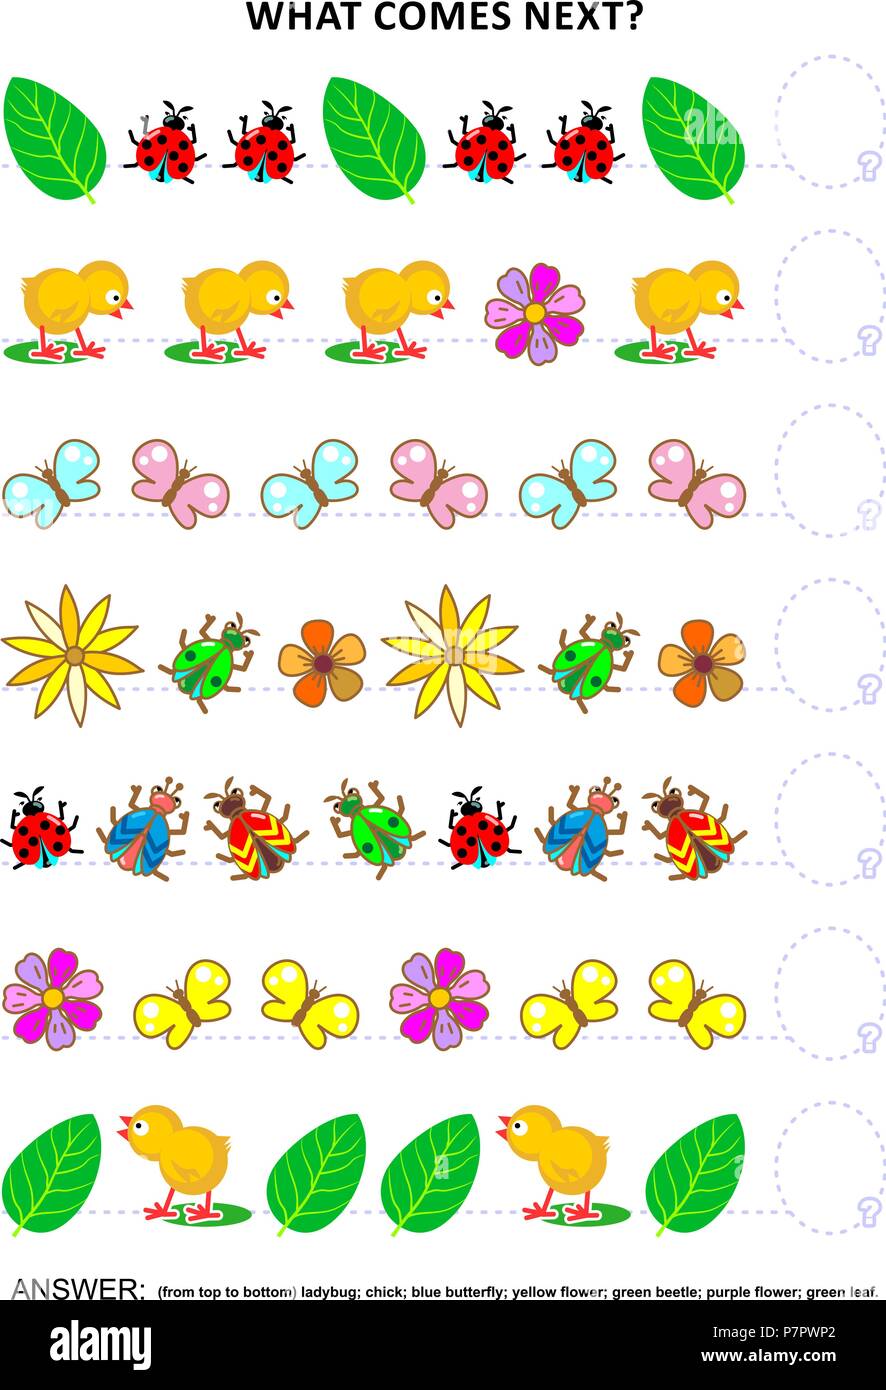 Spring or summer themed educational logic game training sequential pattern recognition skills with chicks, insects, flowers, green leaves. Stock Vector